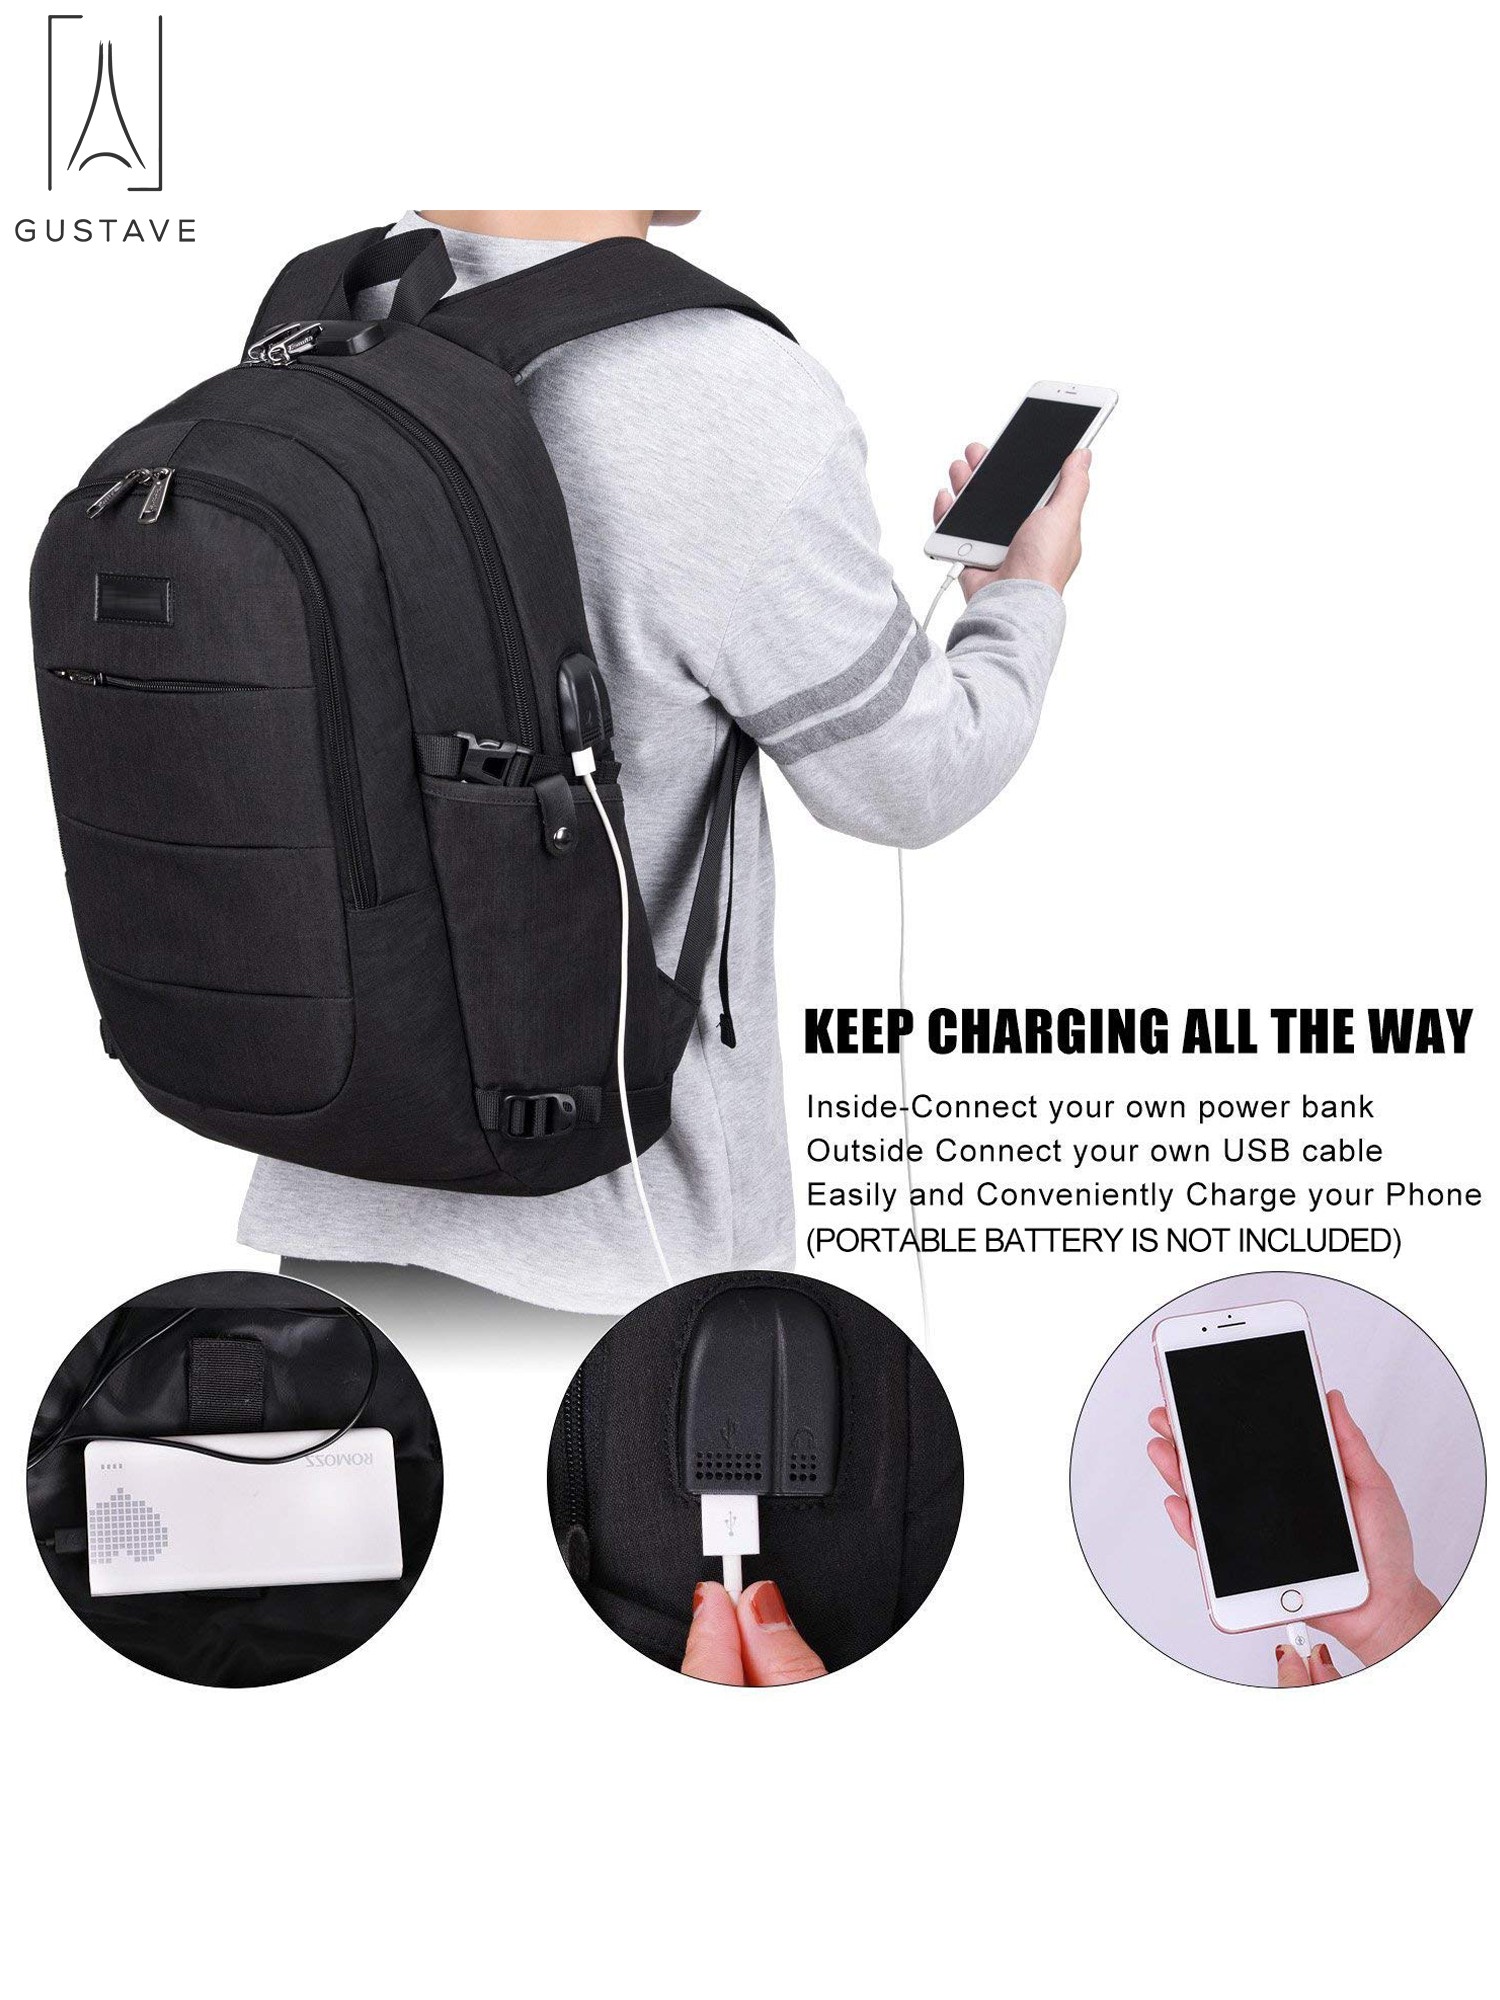 Gustave Laptop Backpack Water Resistant Anti-Theft College Backpack with USB Charging Port and Lock 17Inch Compurter Backpacks for Women Men, Casual Hiking Travel Daypack "Black" - image 4 of 9